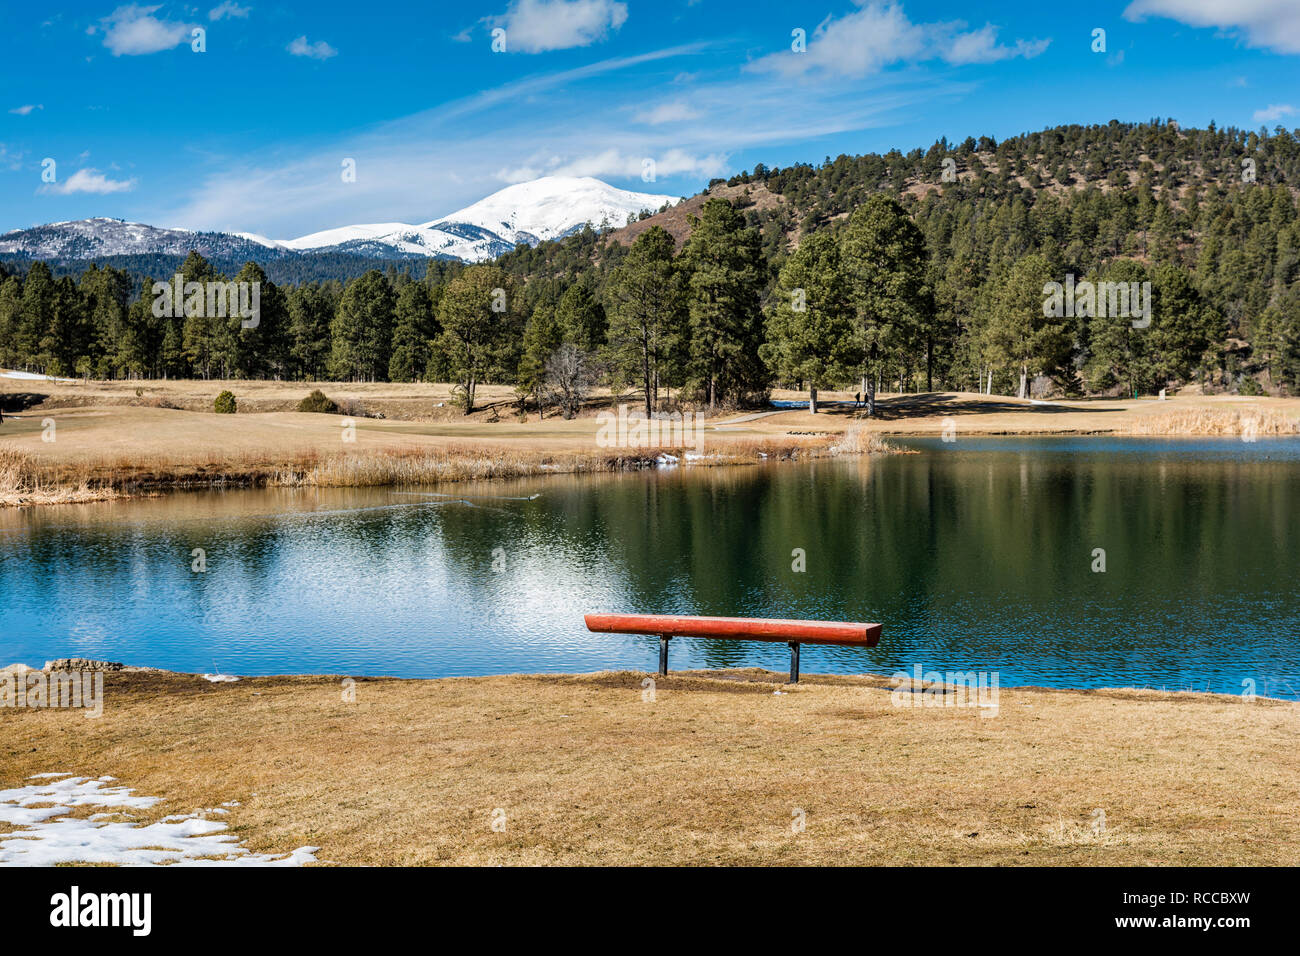 Ruidoso, New Mexico, USA, Sierra Blanca mountain peak from the Inn of the Mountain Gods golf course and lake operated by the Mescalero Apache tribe. Stock Photo